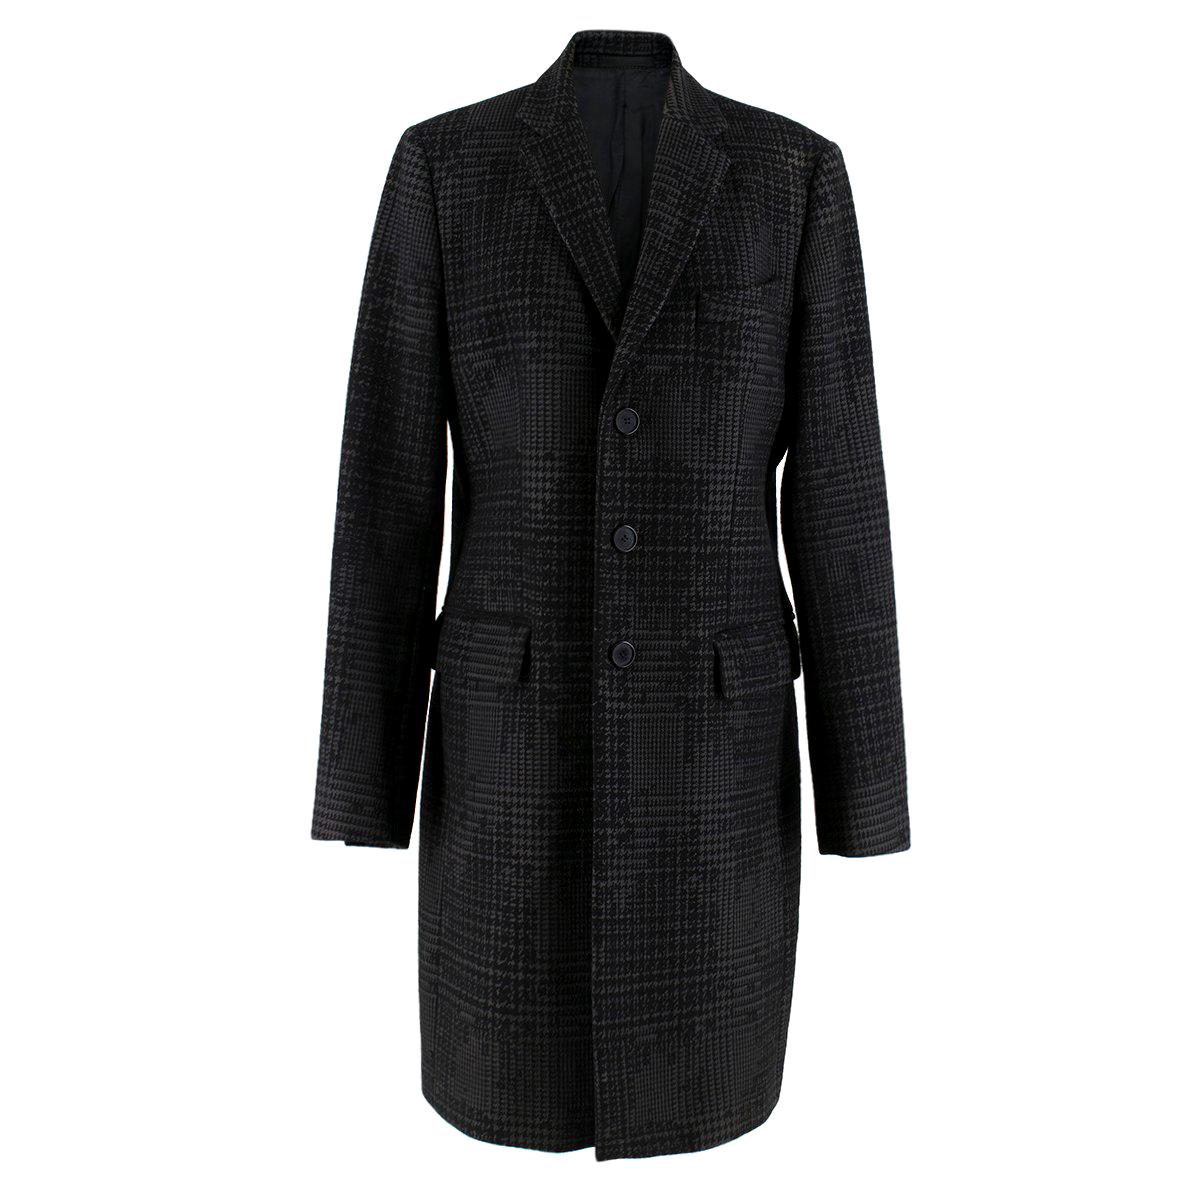 Givenchy Men's Tweed Print Single Breasted Wool Coat  IT 48